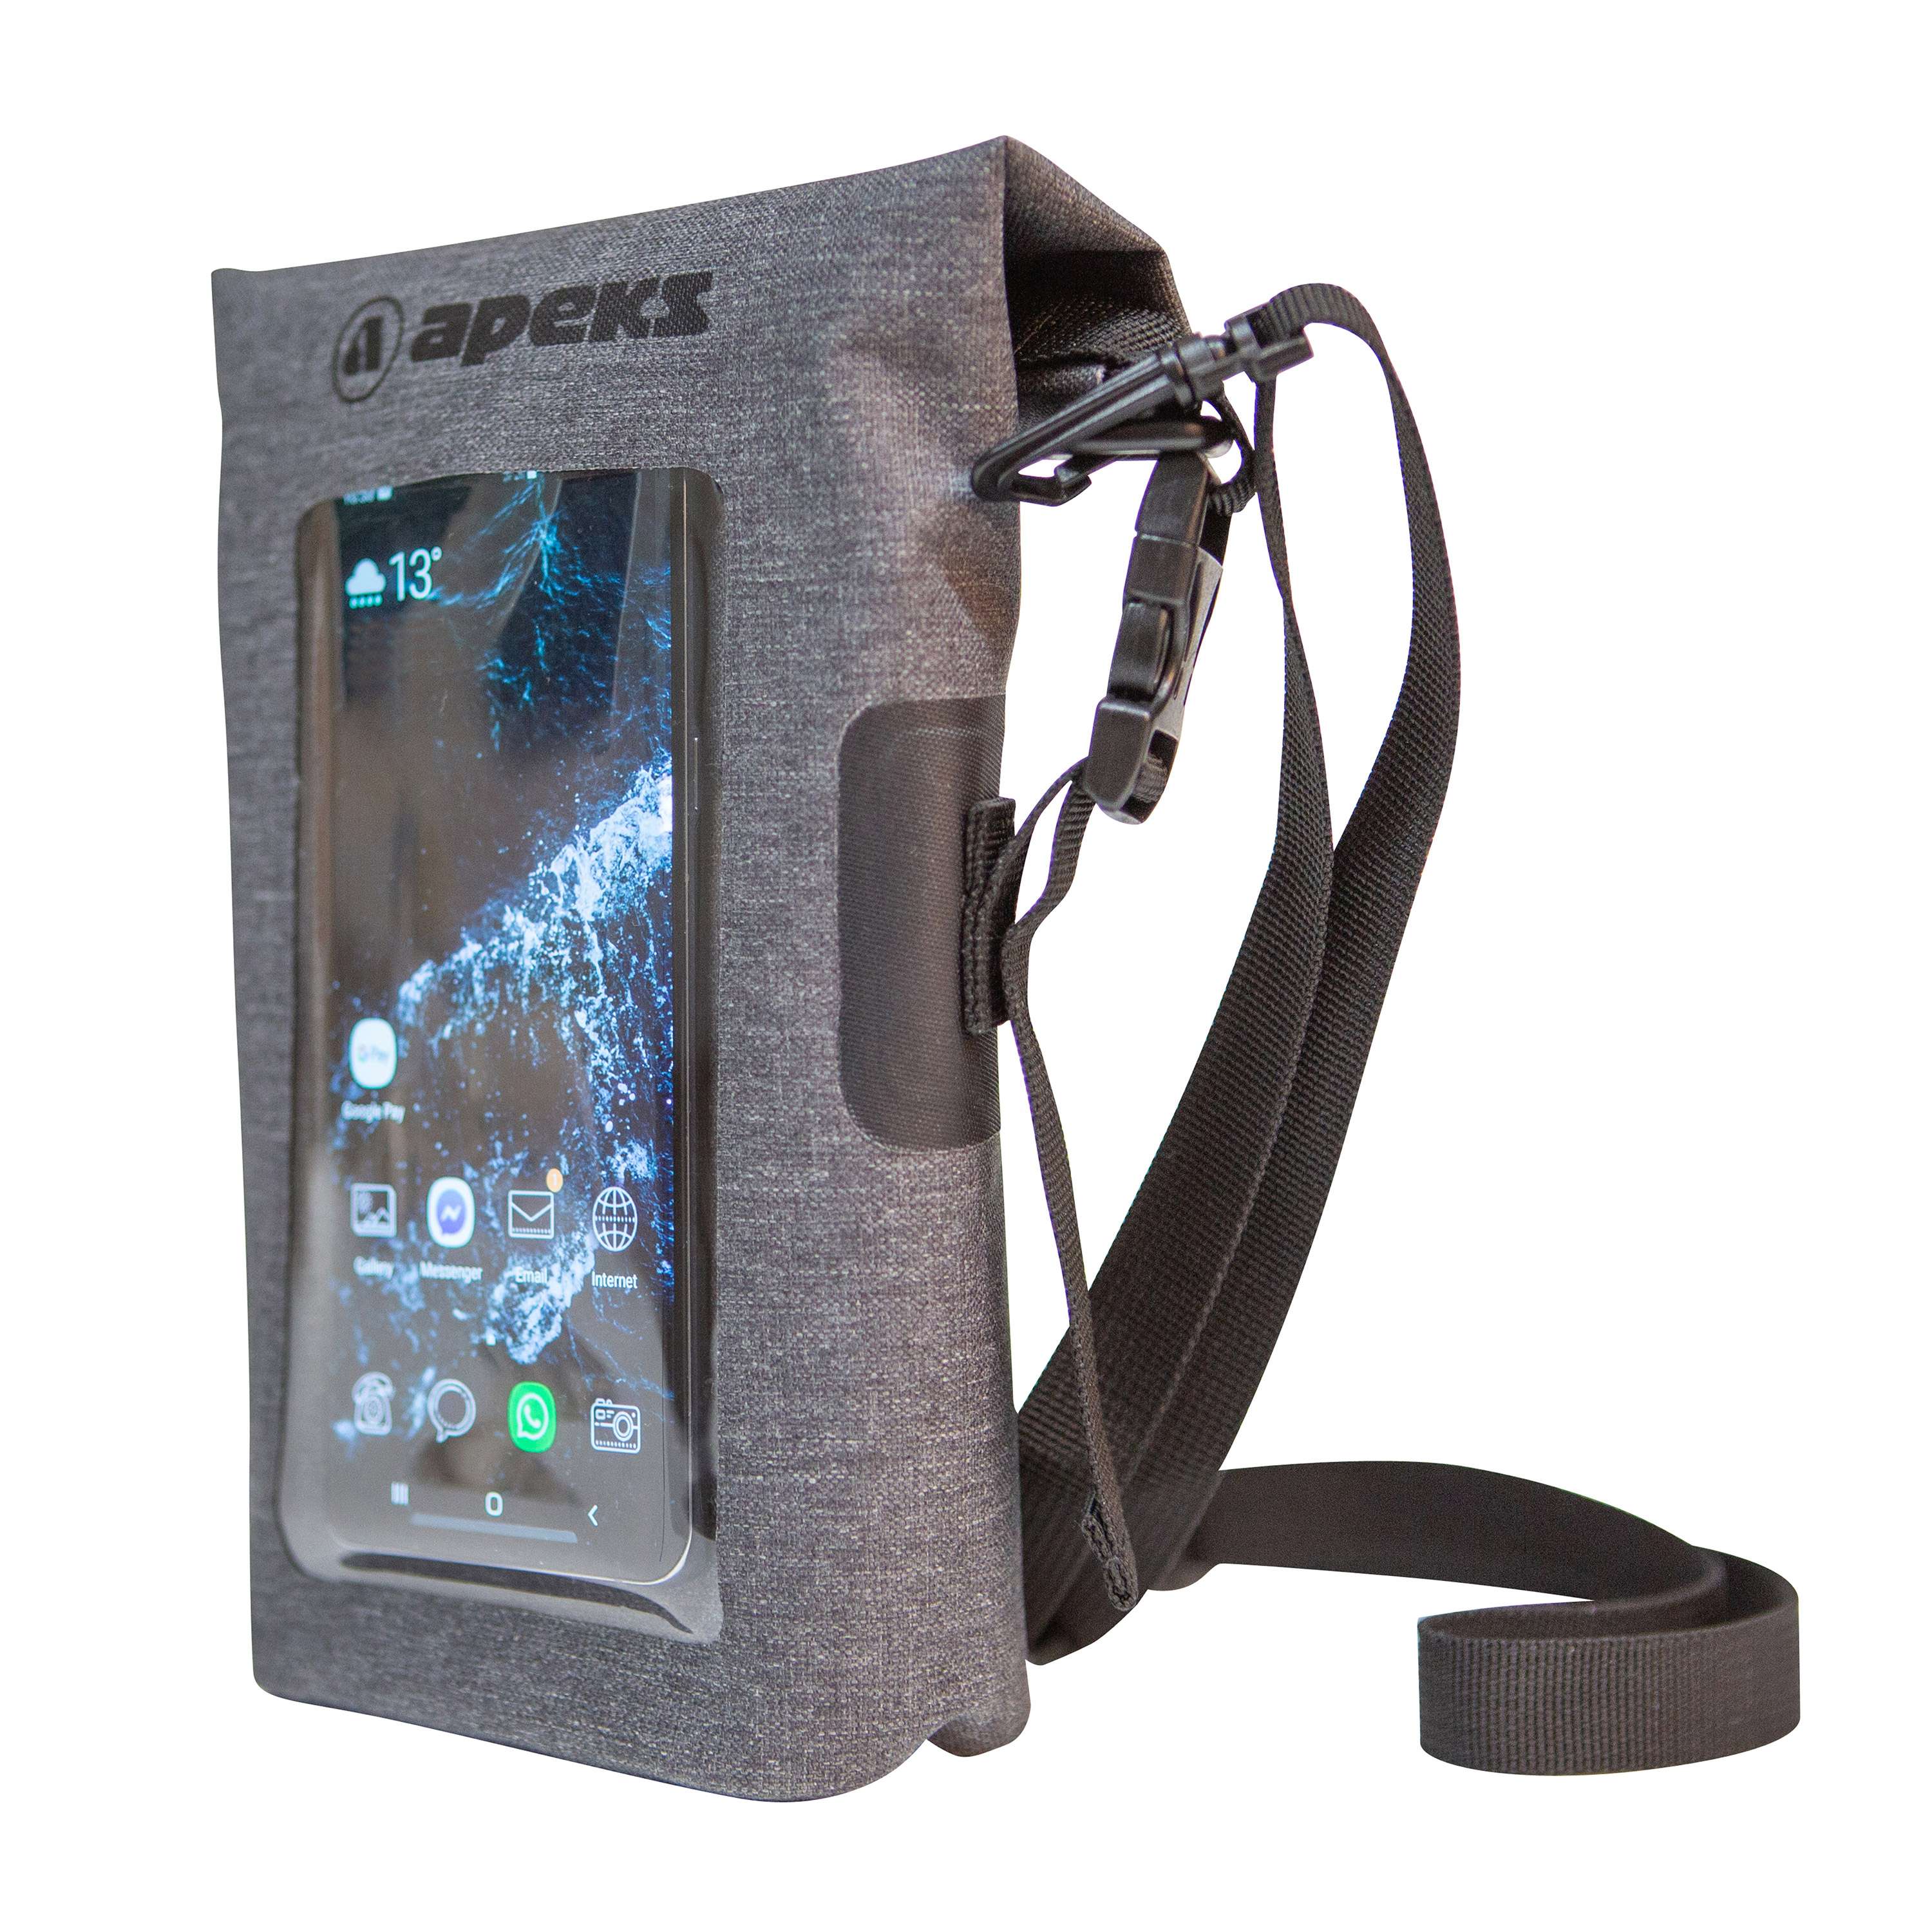 DiCAPac WP-i20 Floating Waterproof Case with Hand Strap for Apple